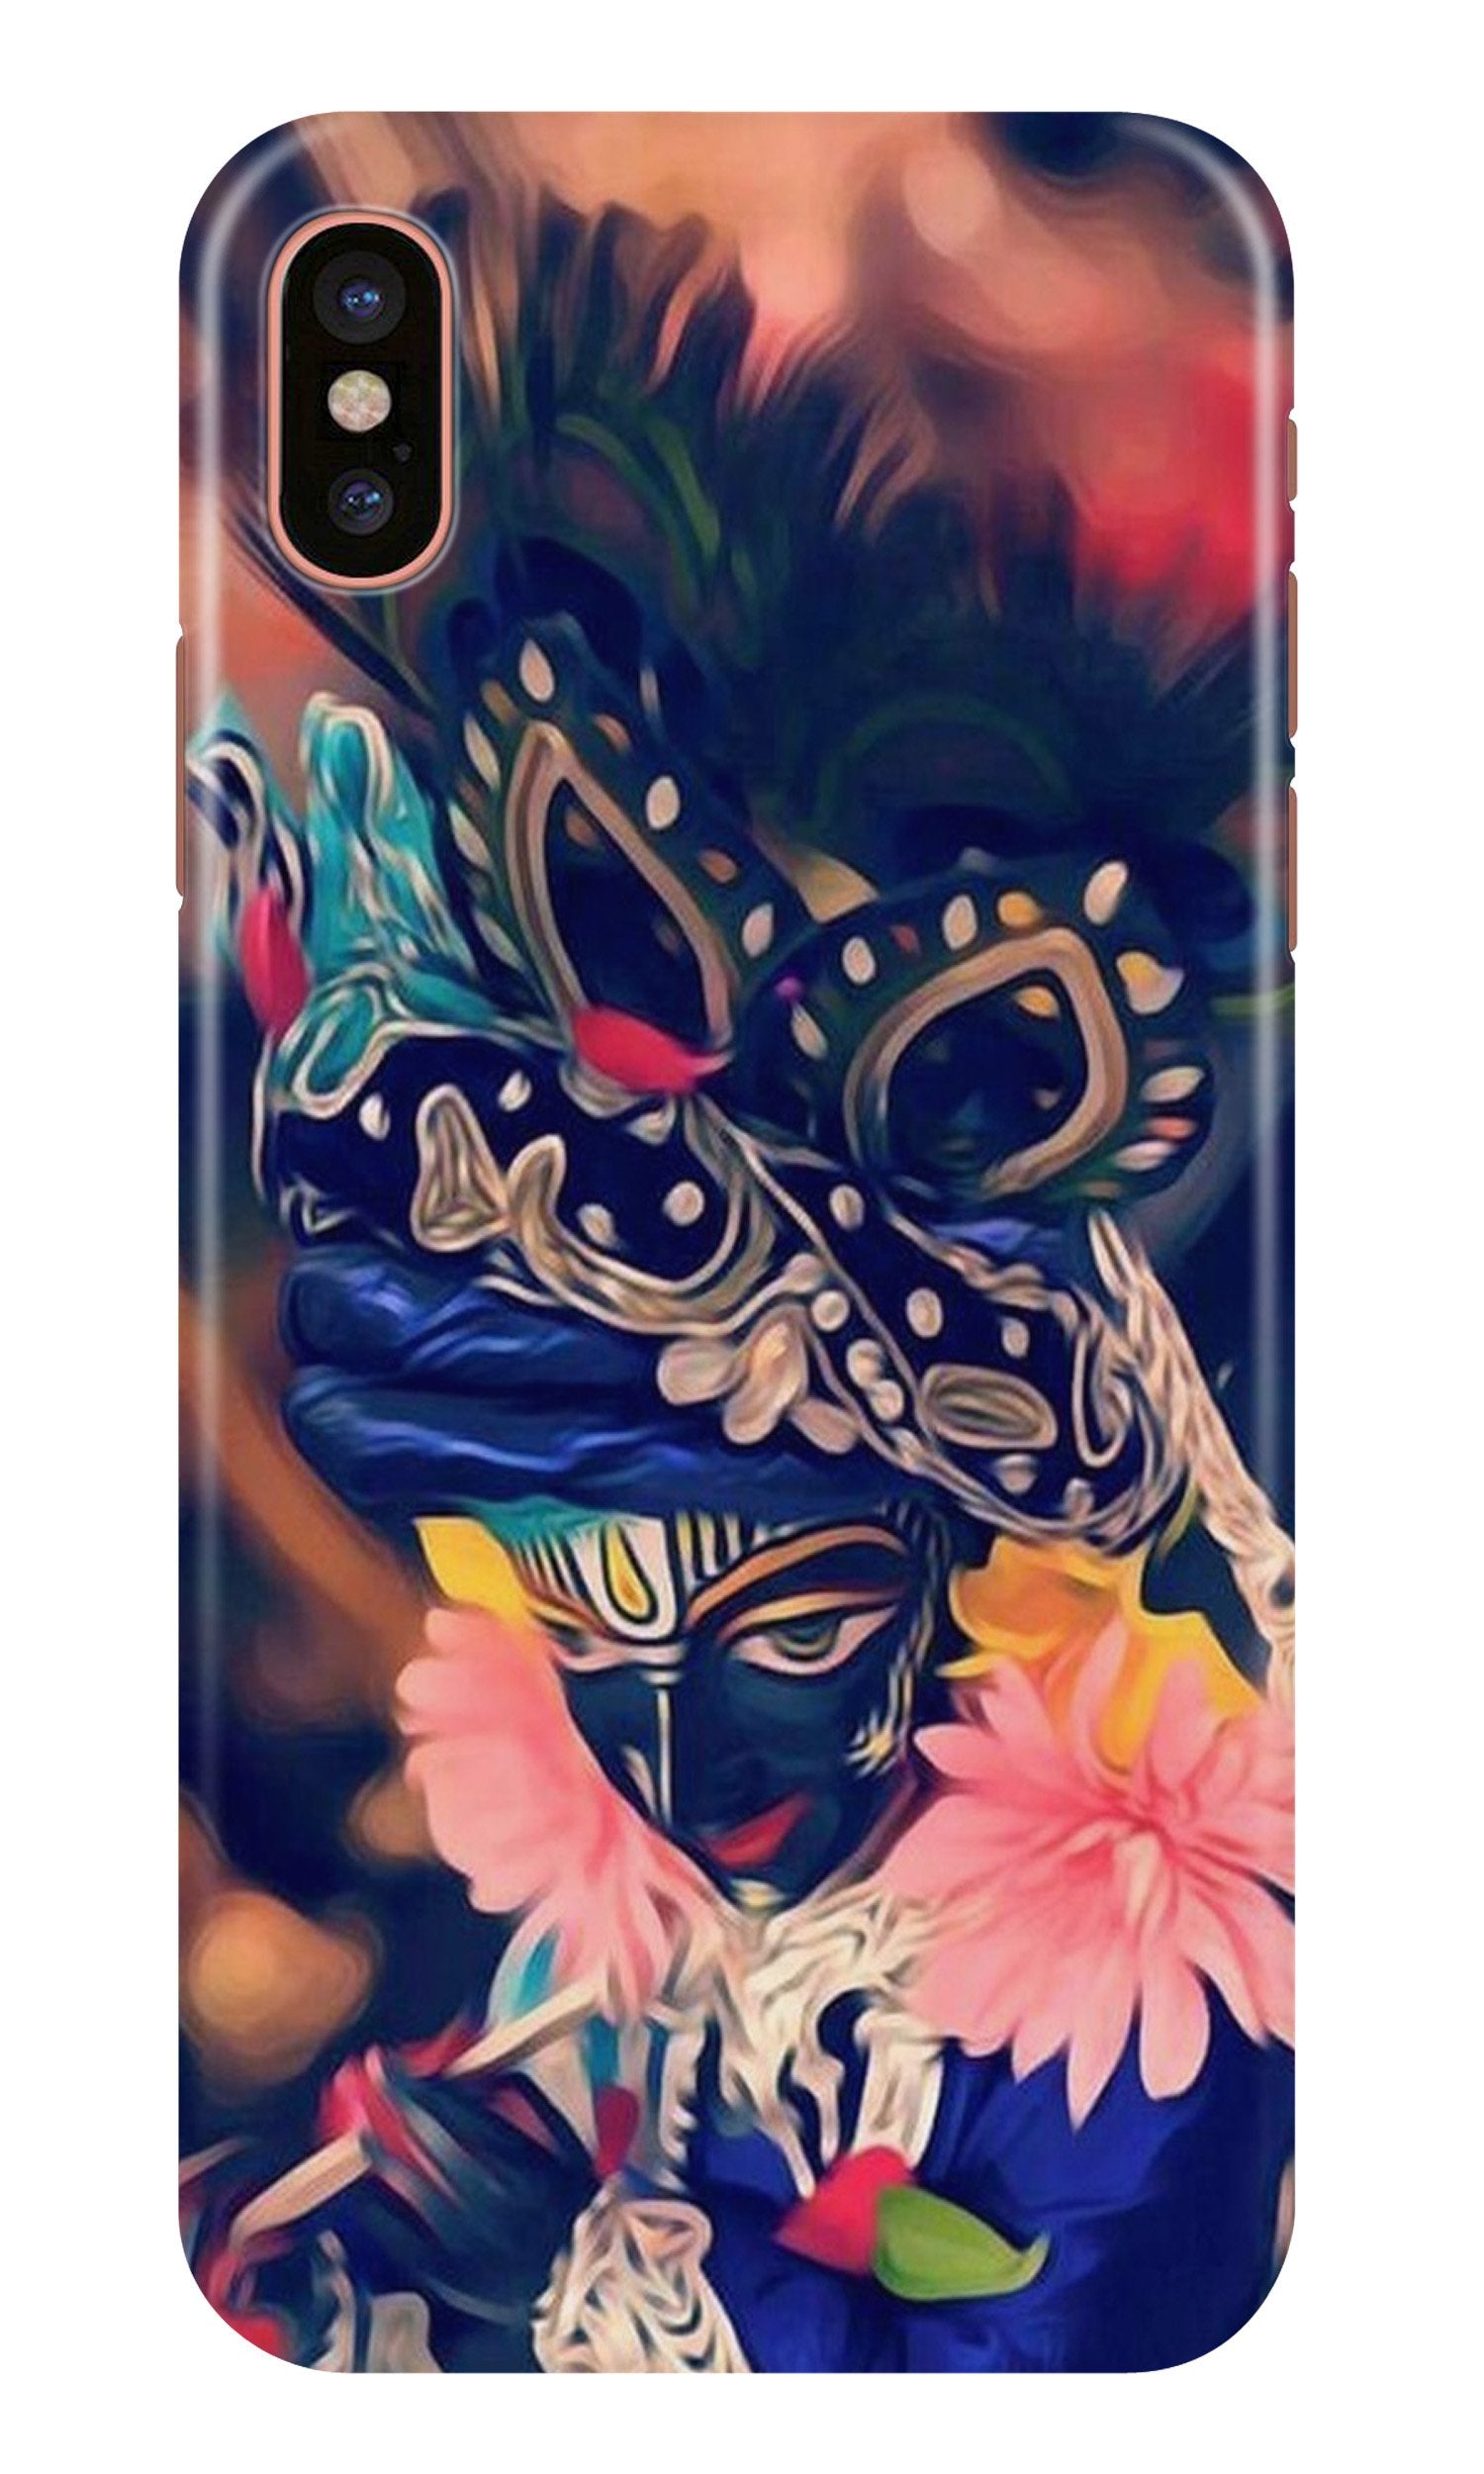 Lord Krishna Case for iPhone X